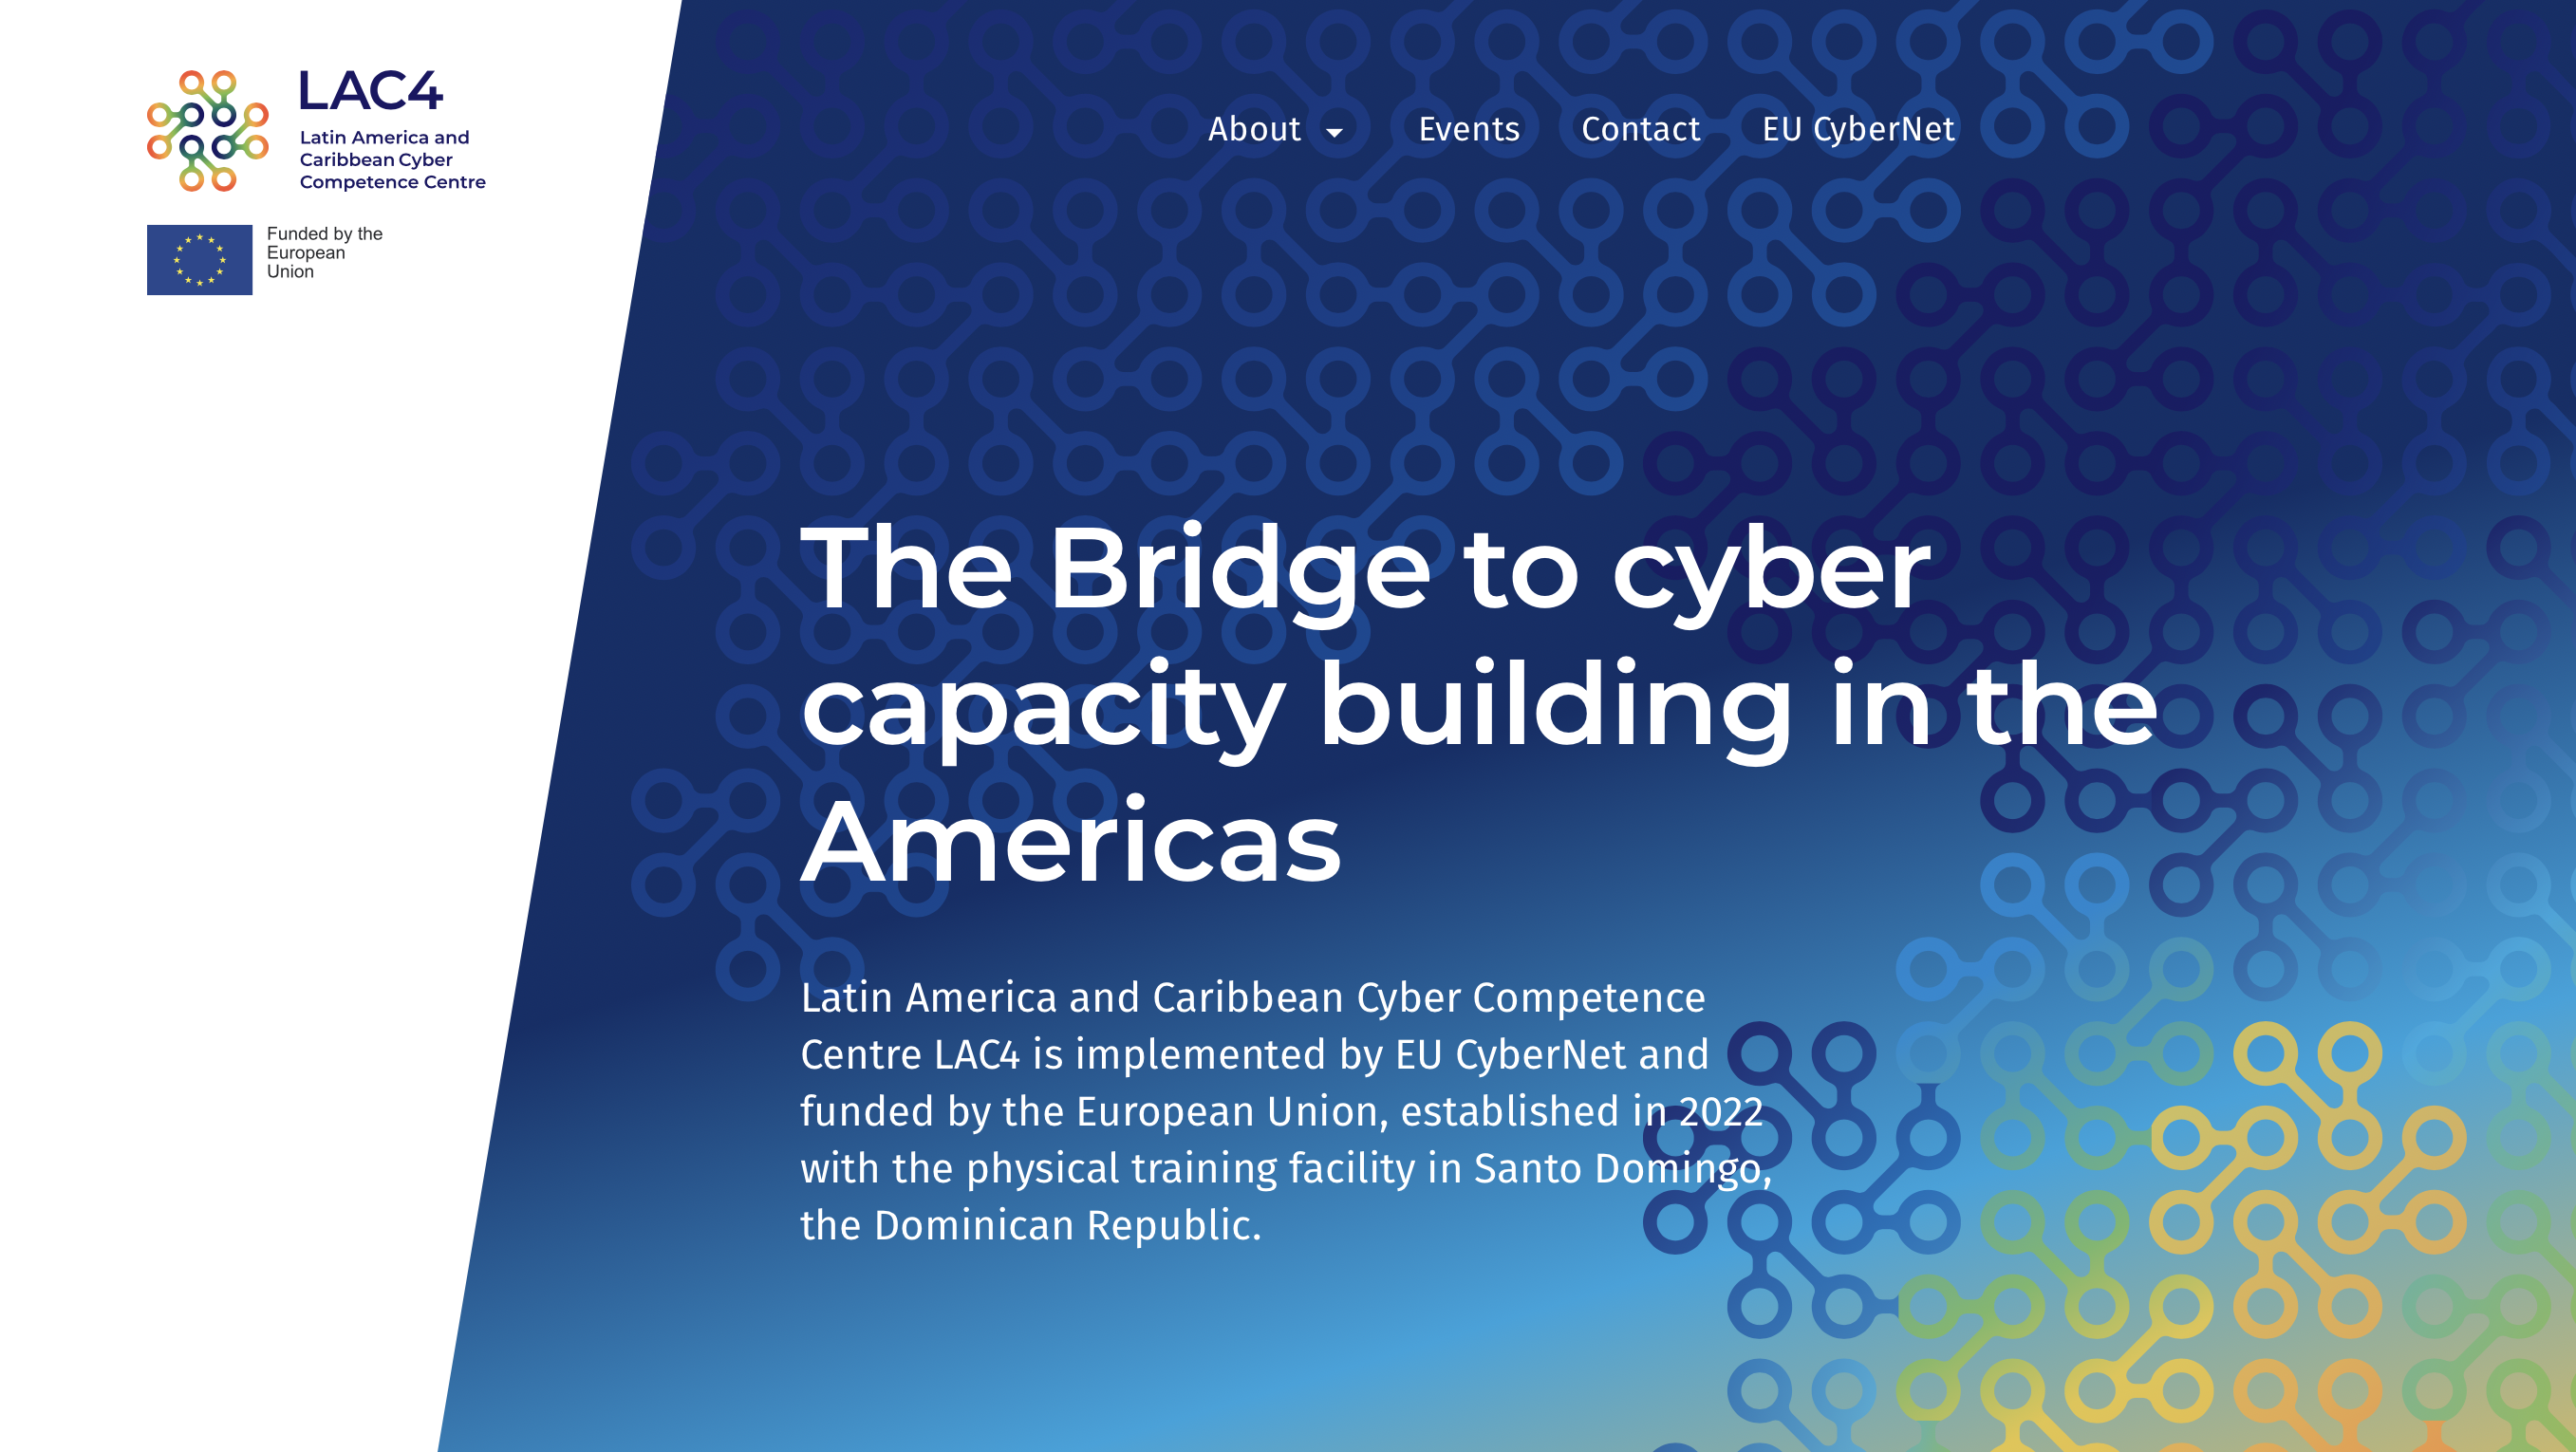 Latin America and Caribbean Cyber Competence Centre